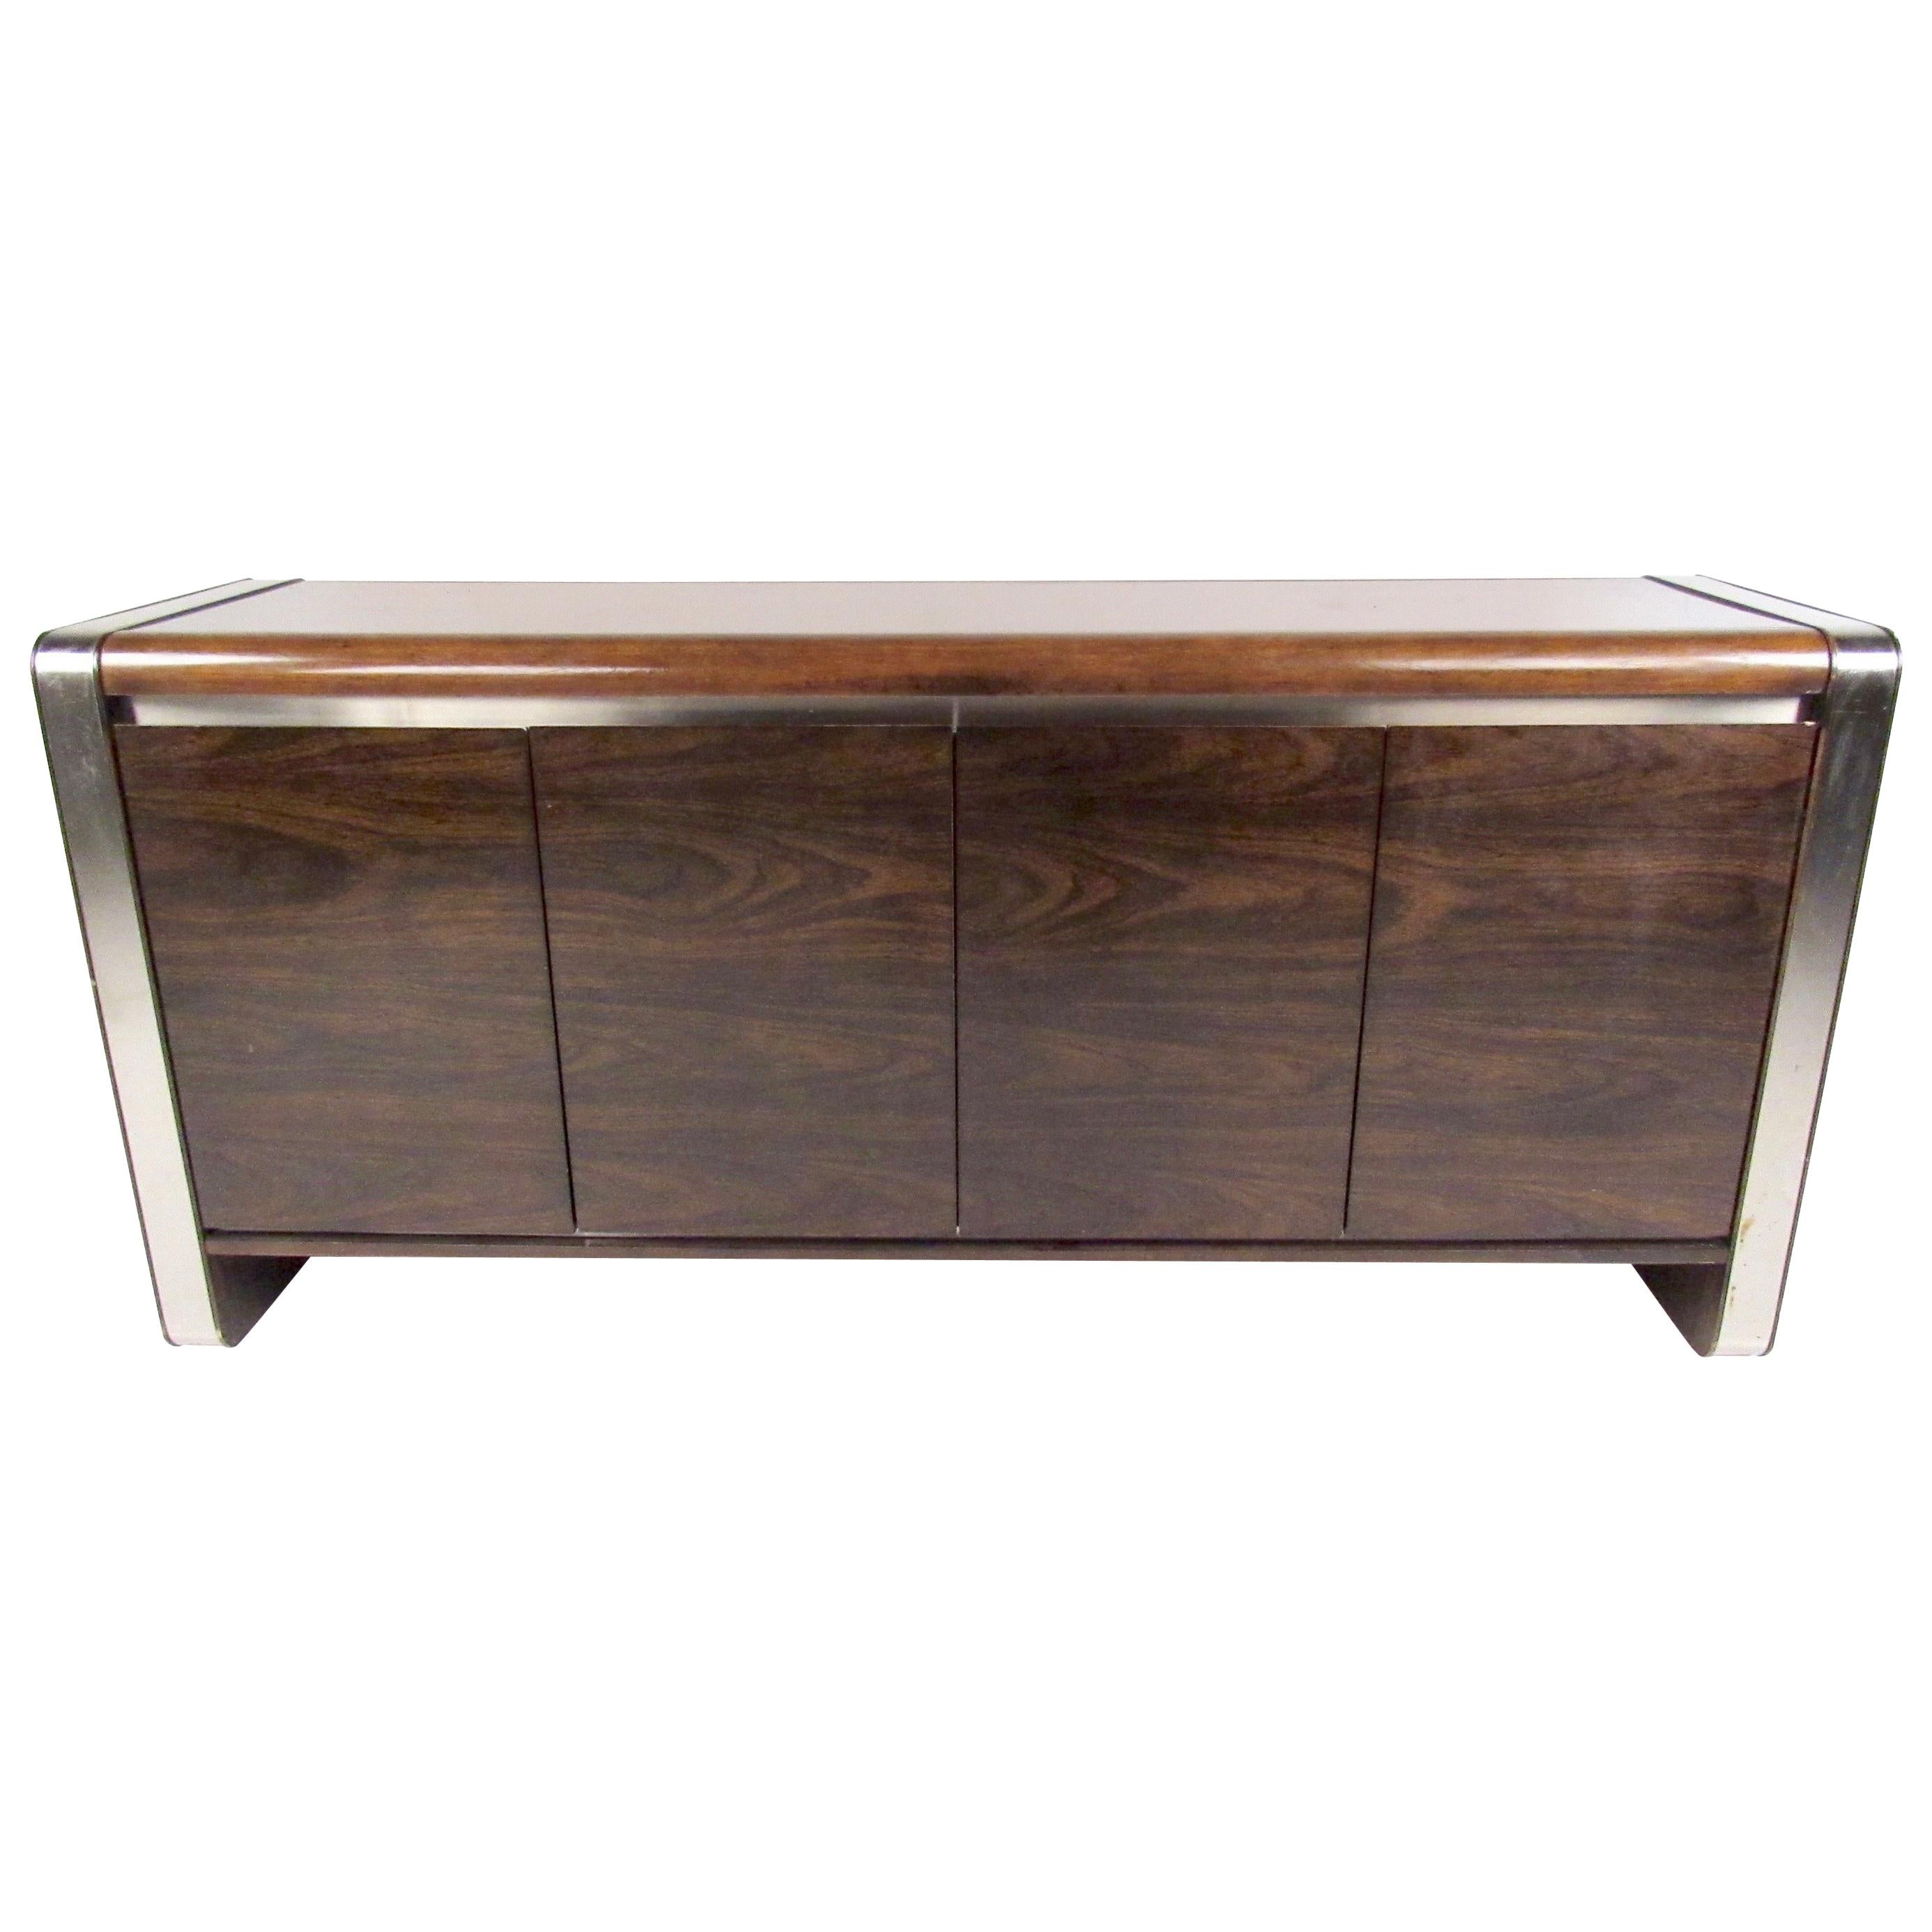 Mid-Century Modern Sideboard or Credenza by Founders